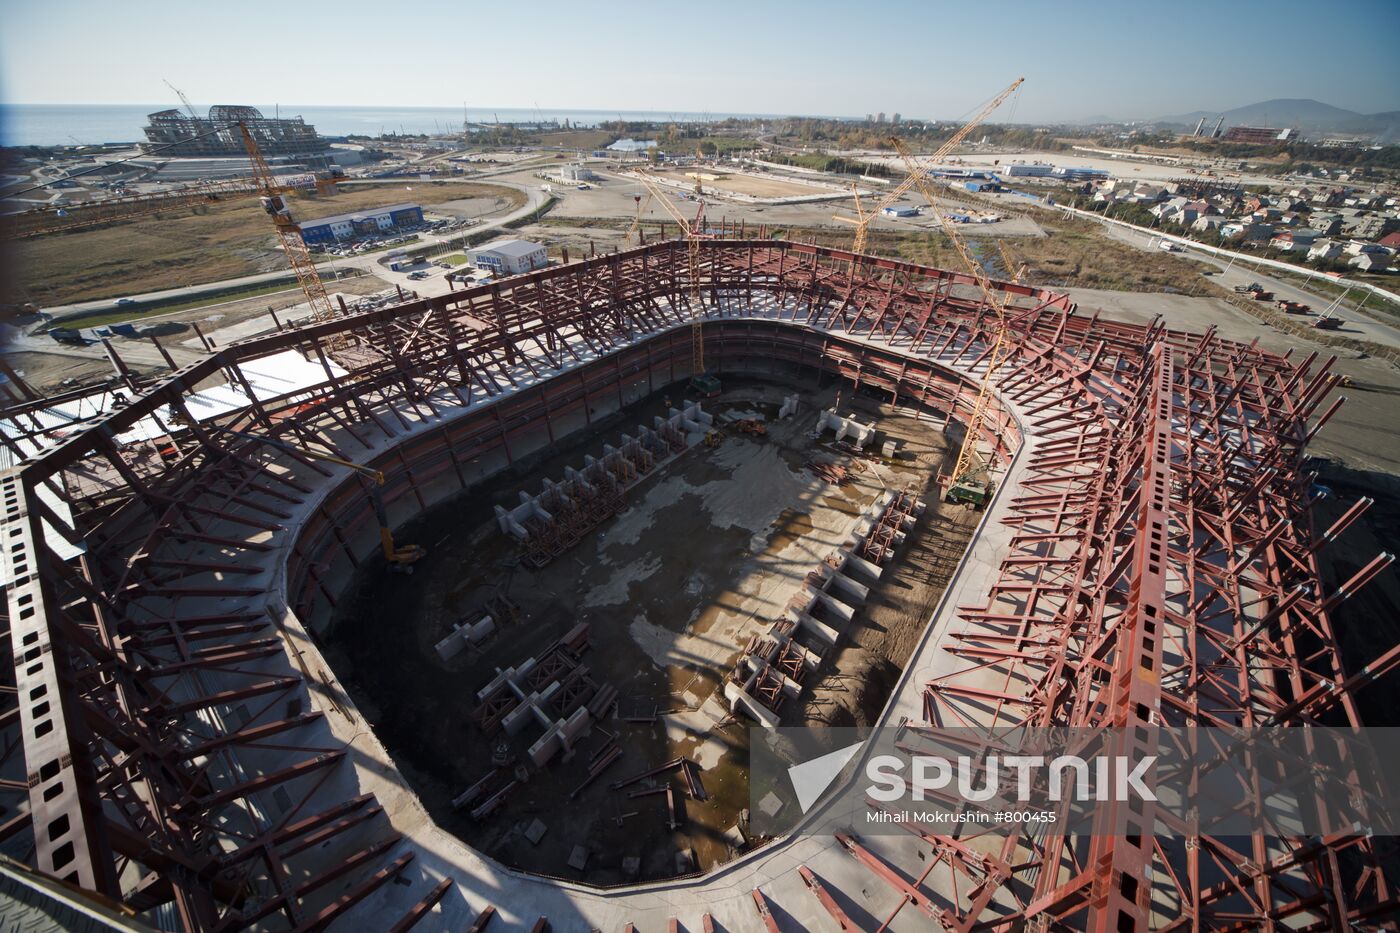 Construction of Olympic facilities in Sochi